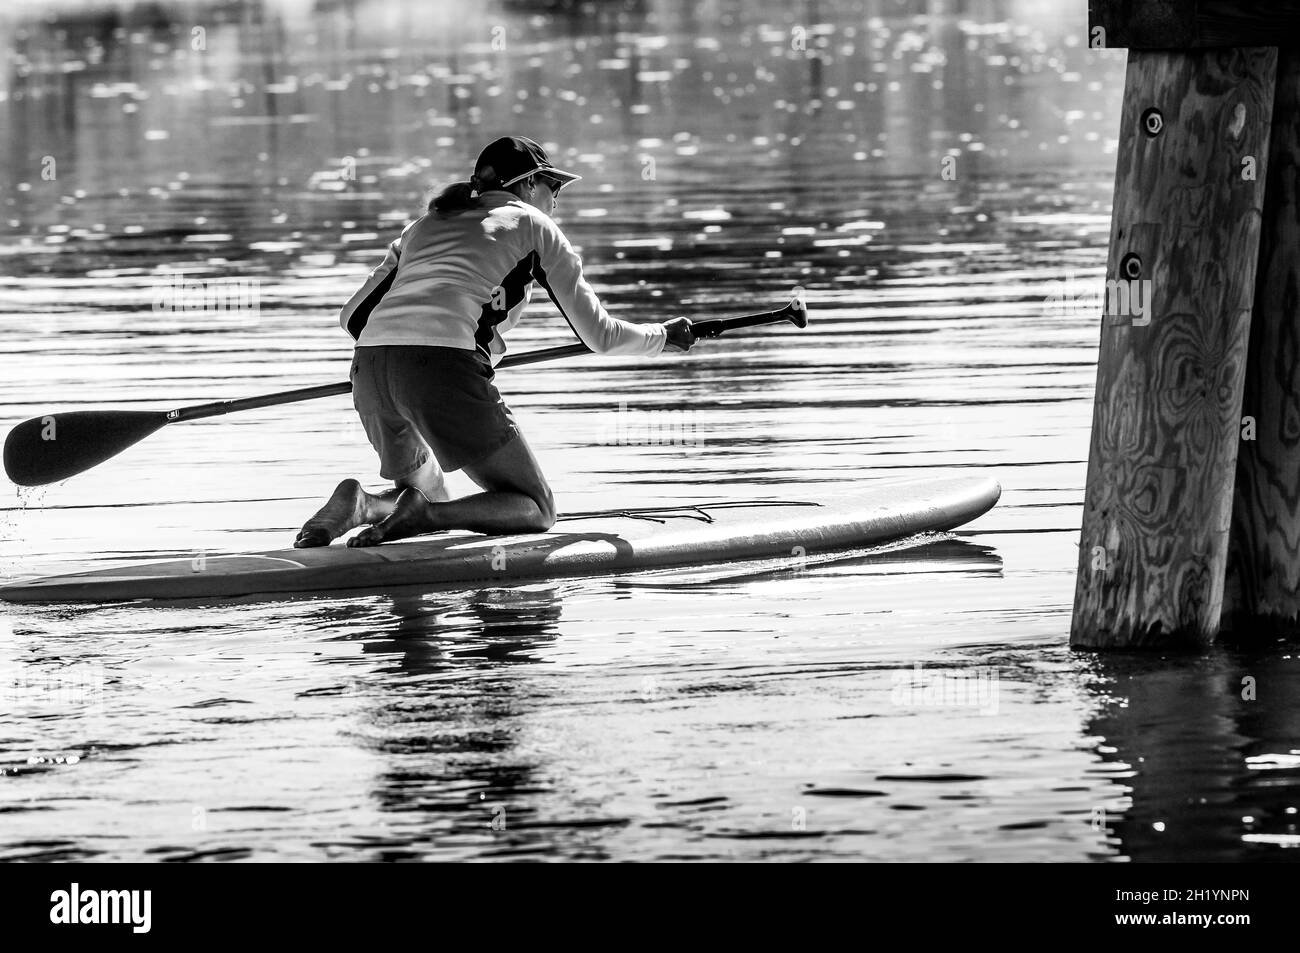 A young lady on her paddleboard heads out from the shadows under the bridge into the bright sunlight on a very still saltwater tidal river Stock Photo